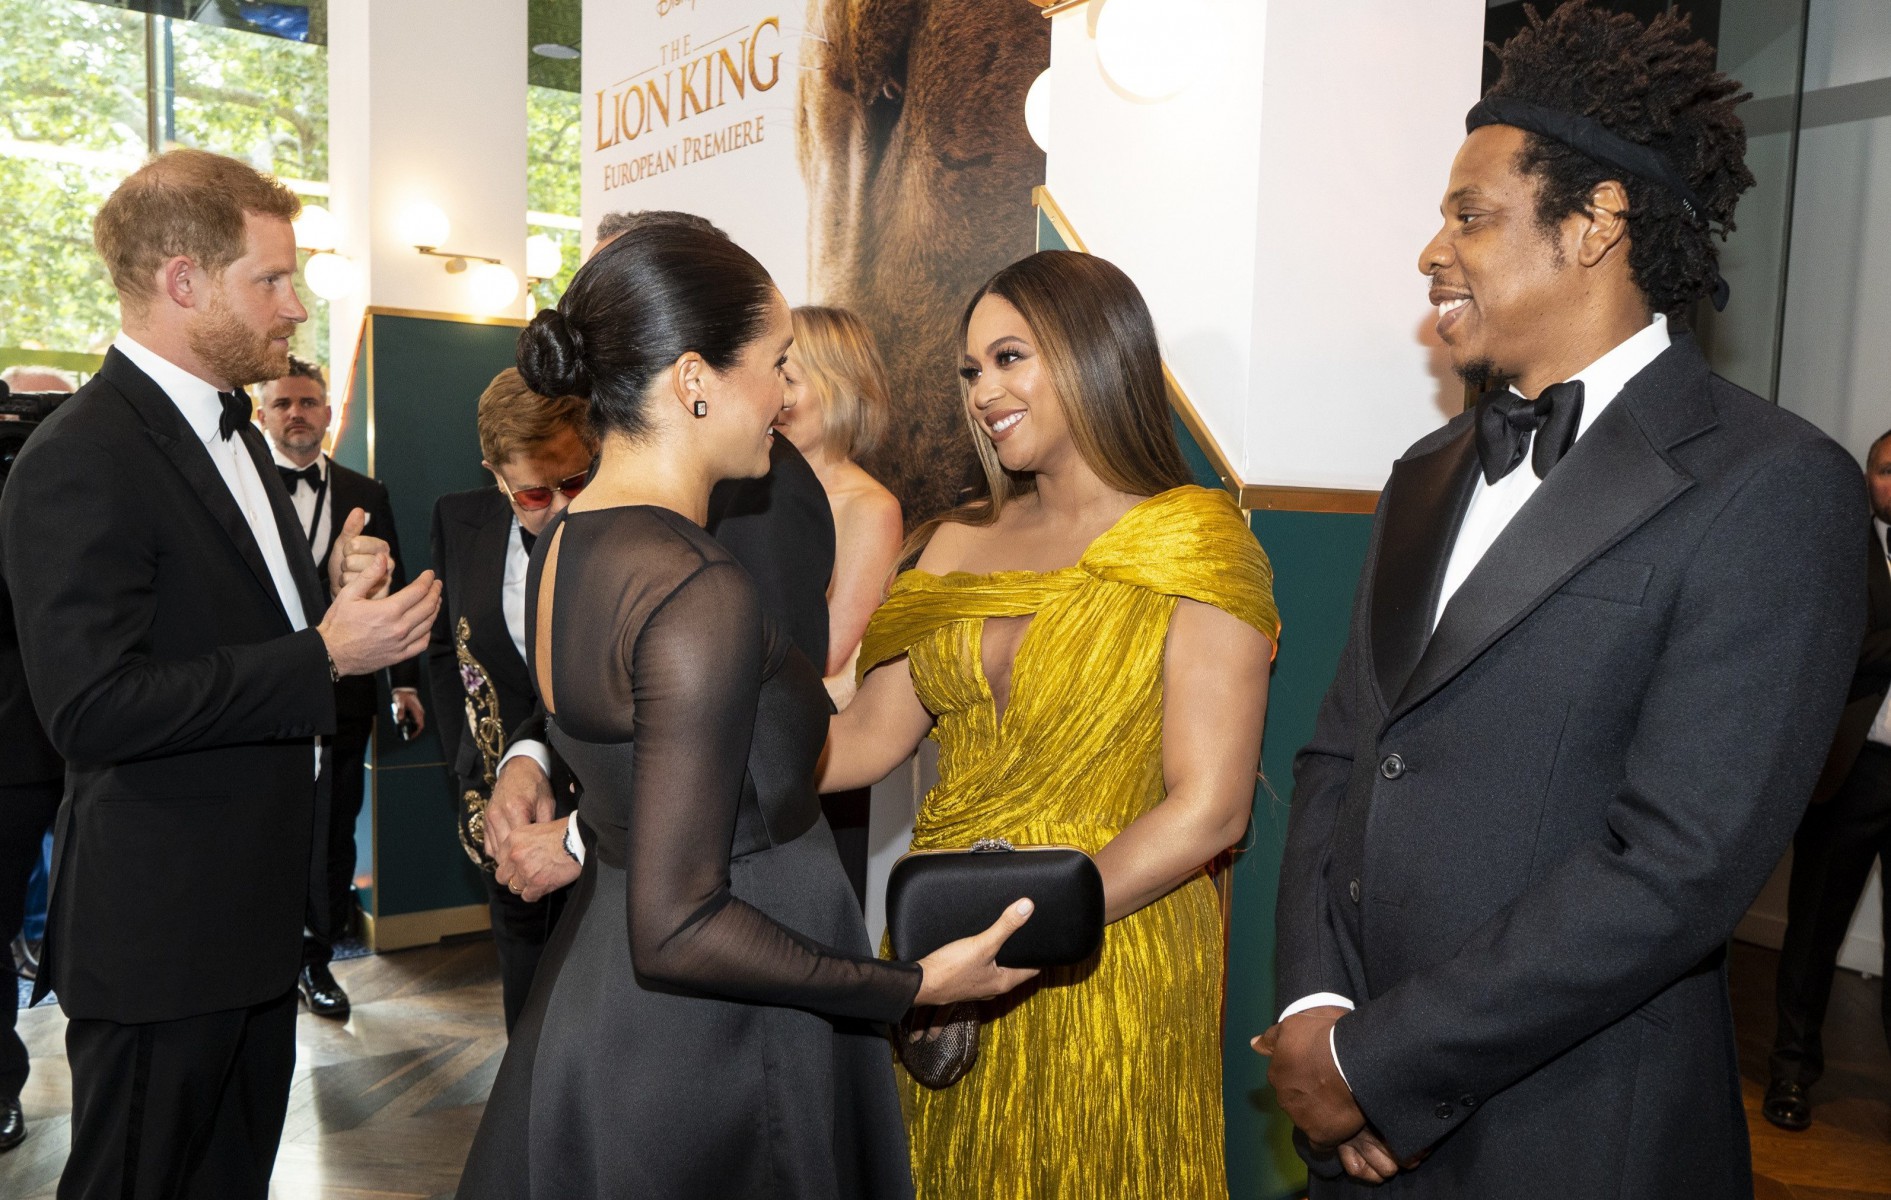 Meghan was pictured speaking to Beyonce at the event